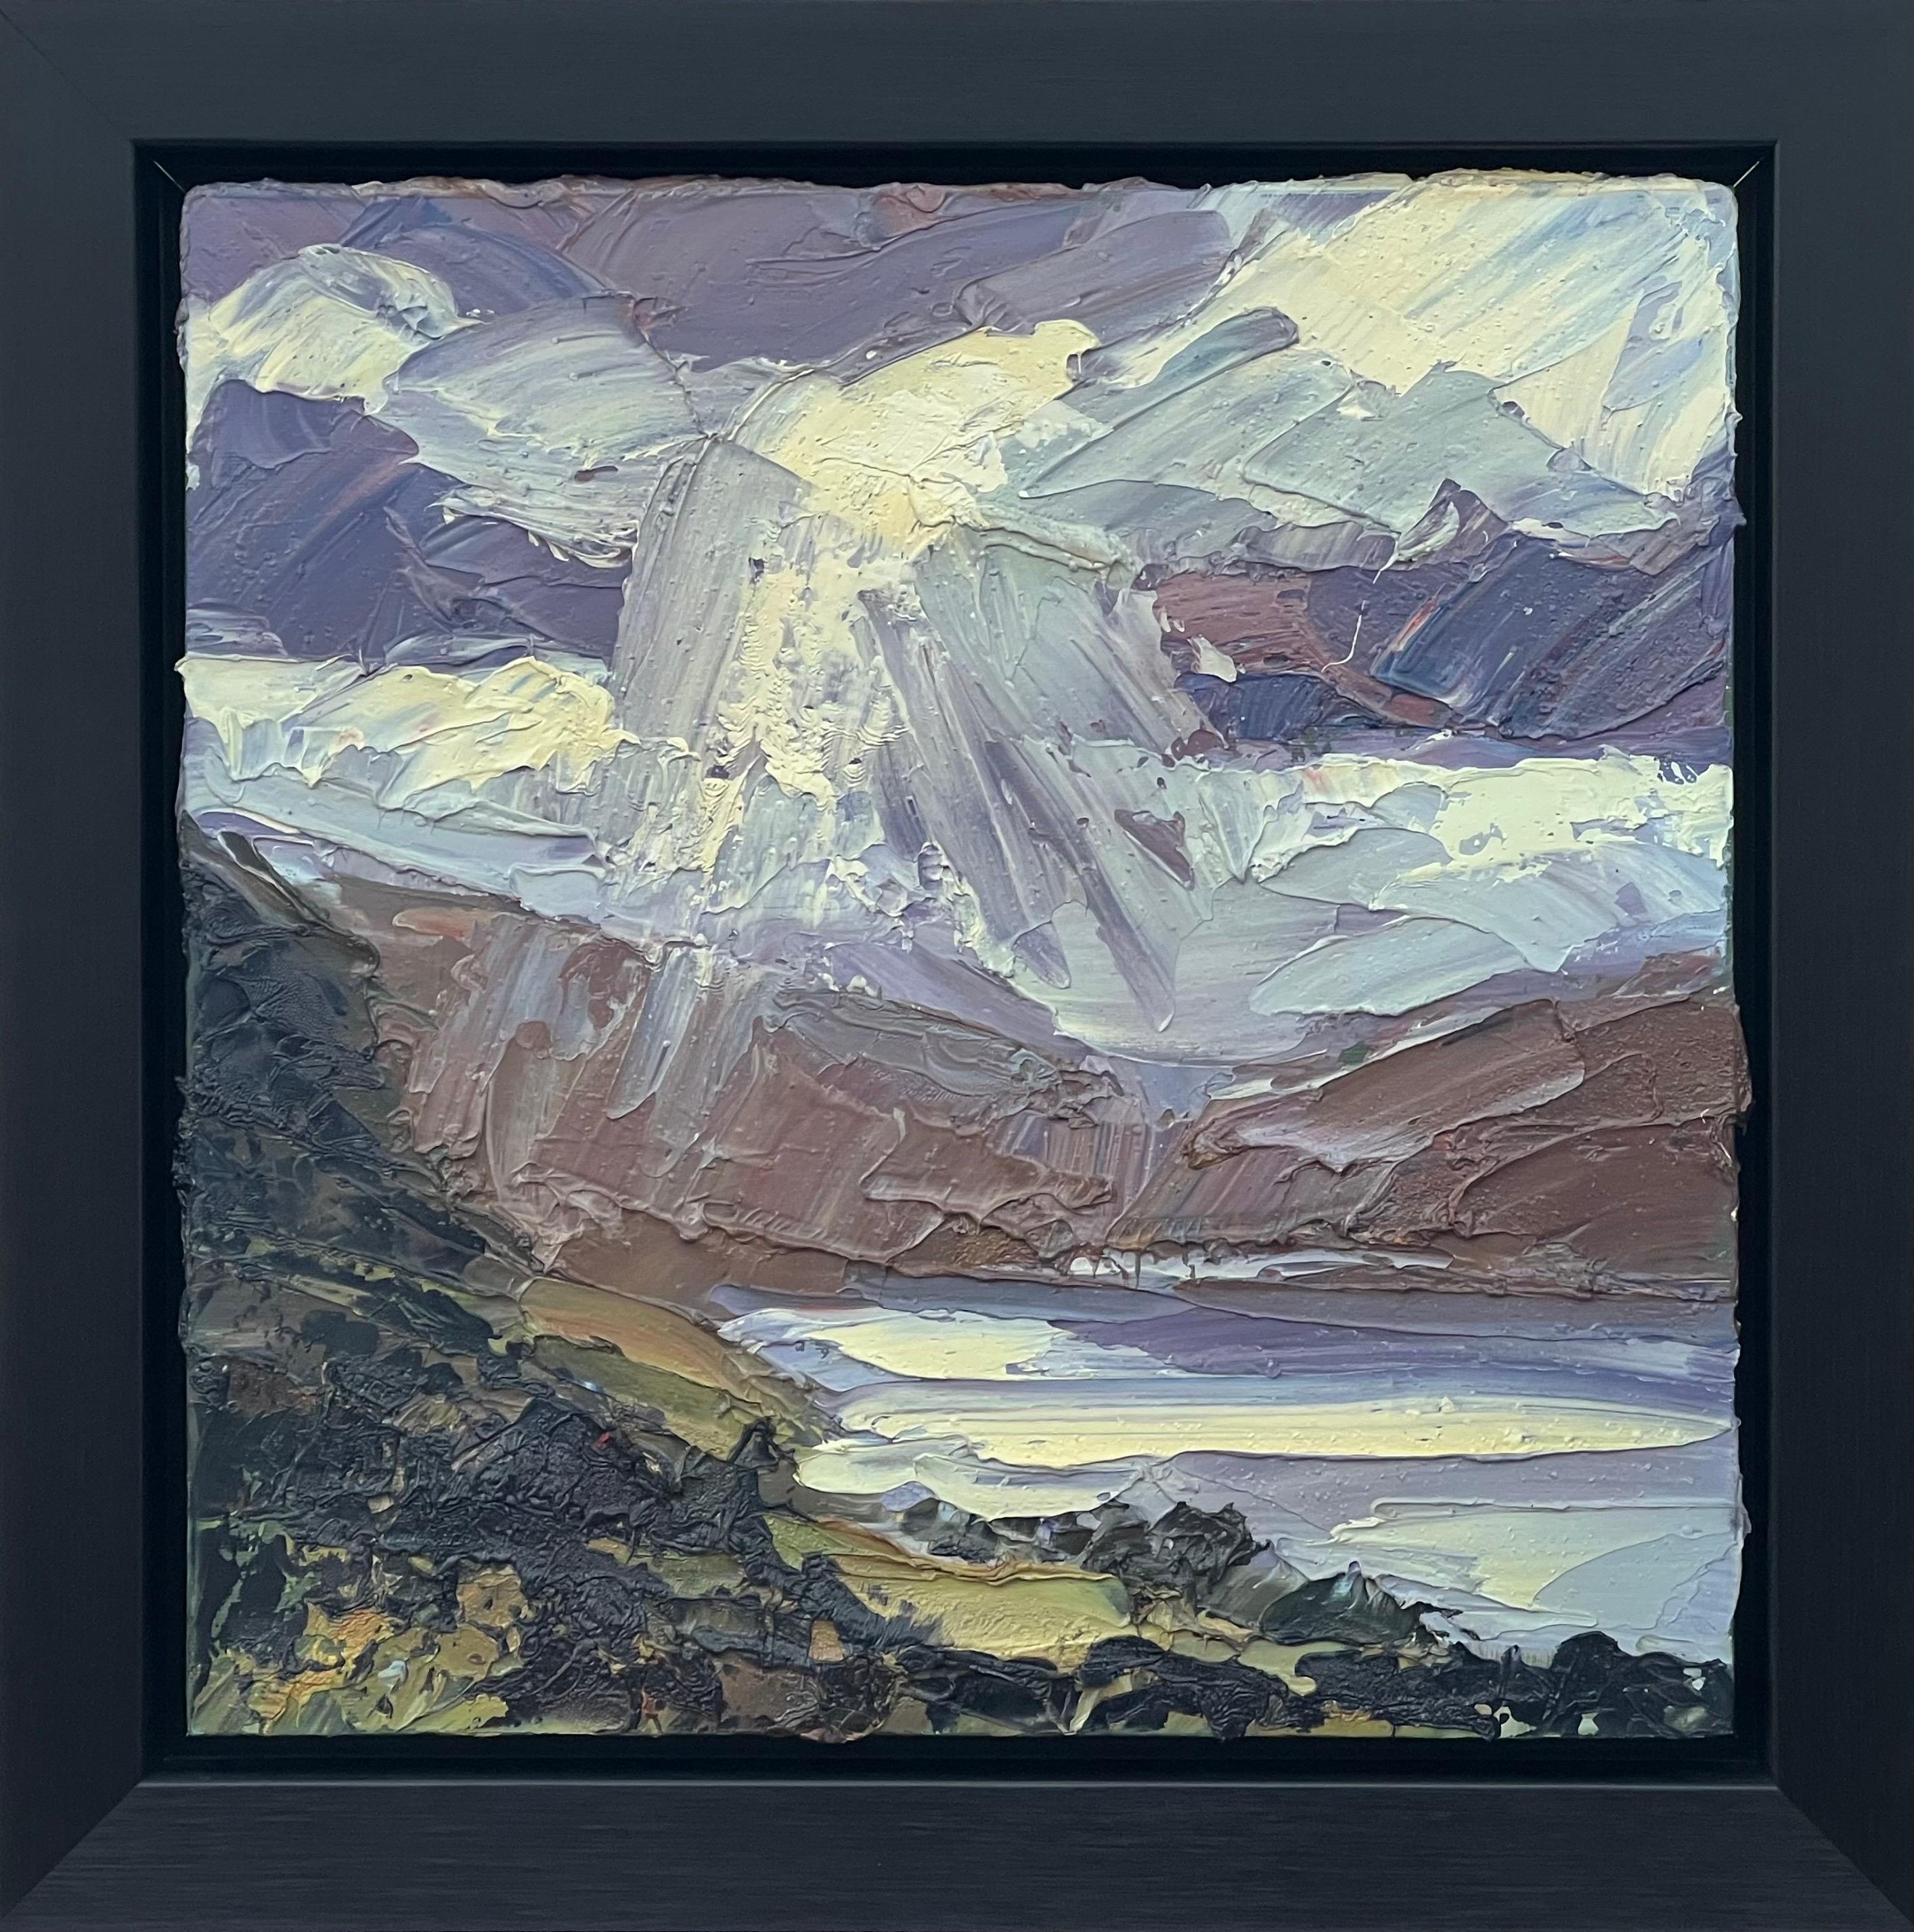 Colin Halliday Landscape Painting - Impasto Oil Painting of Derwent Water in Keswick in the Lake District of England